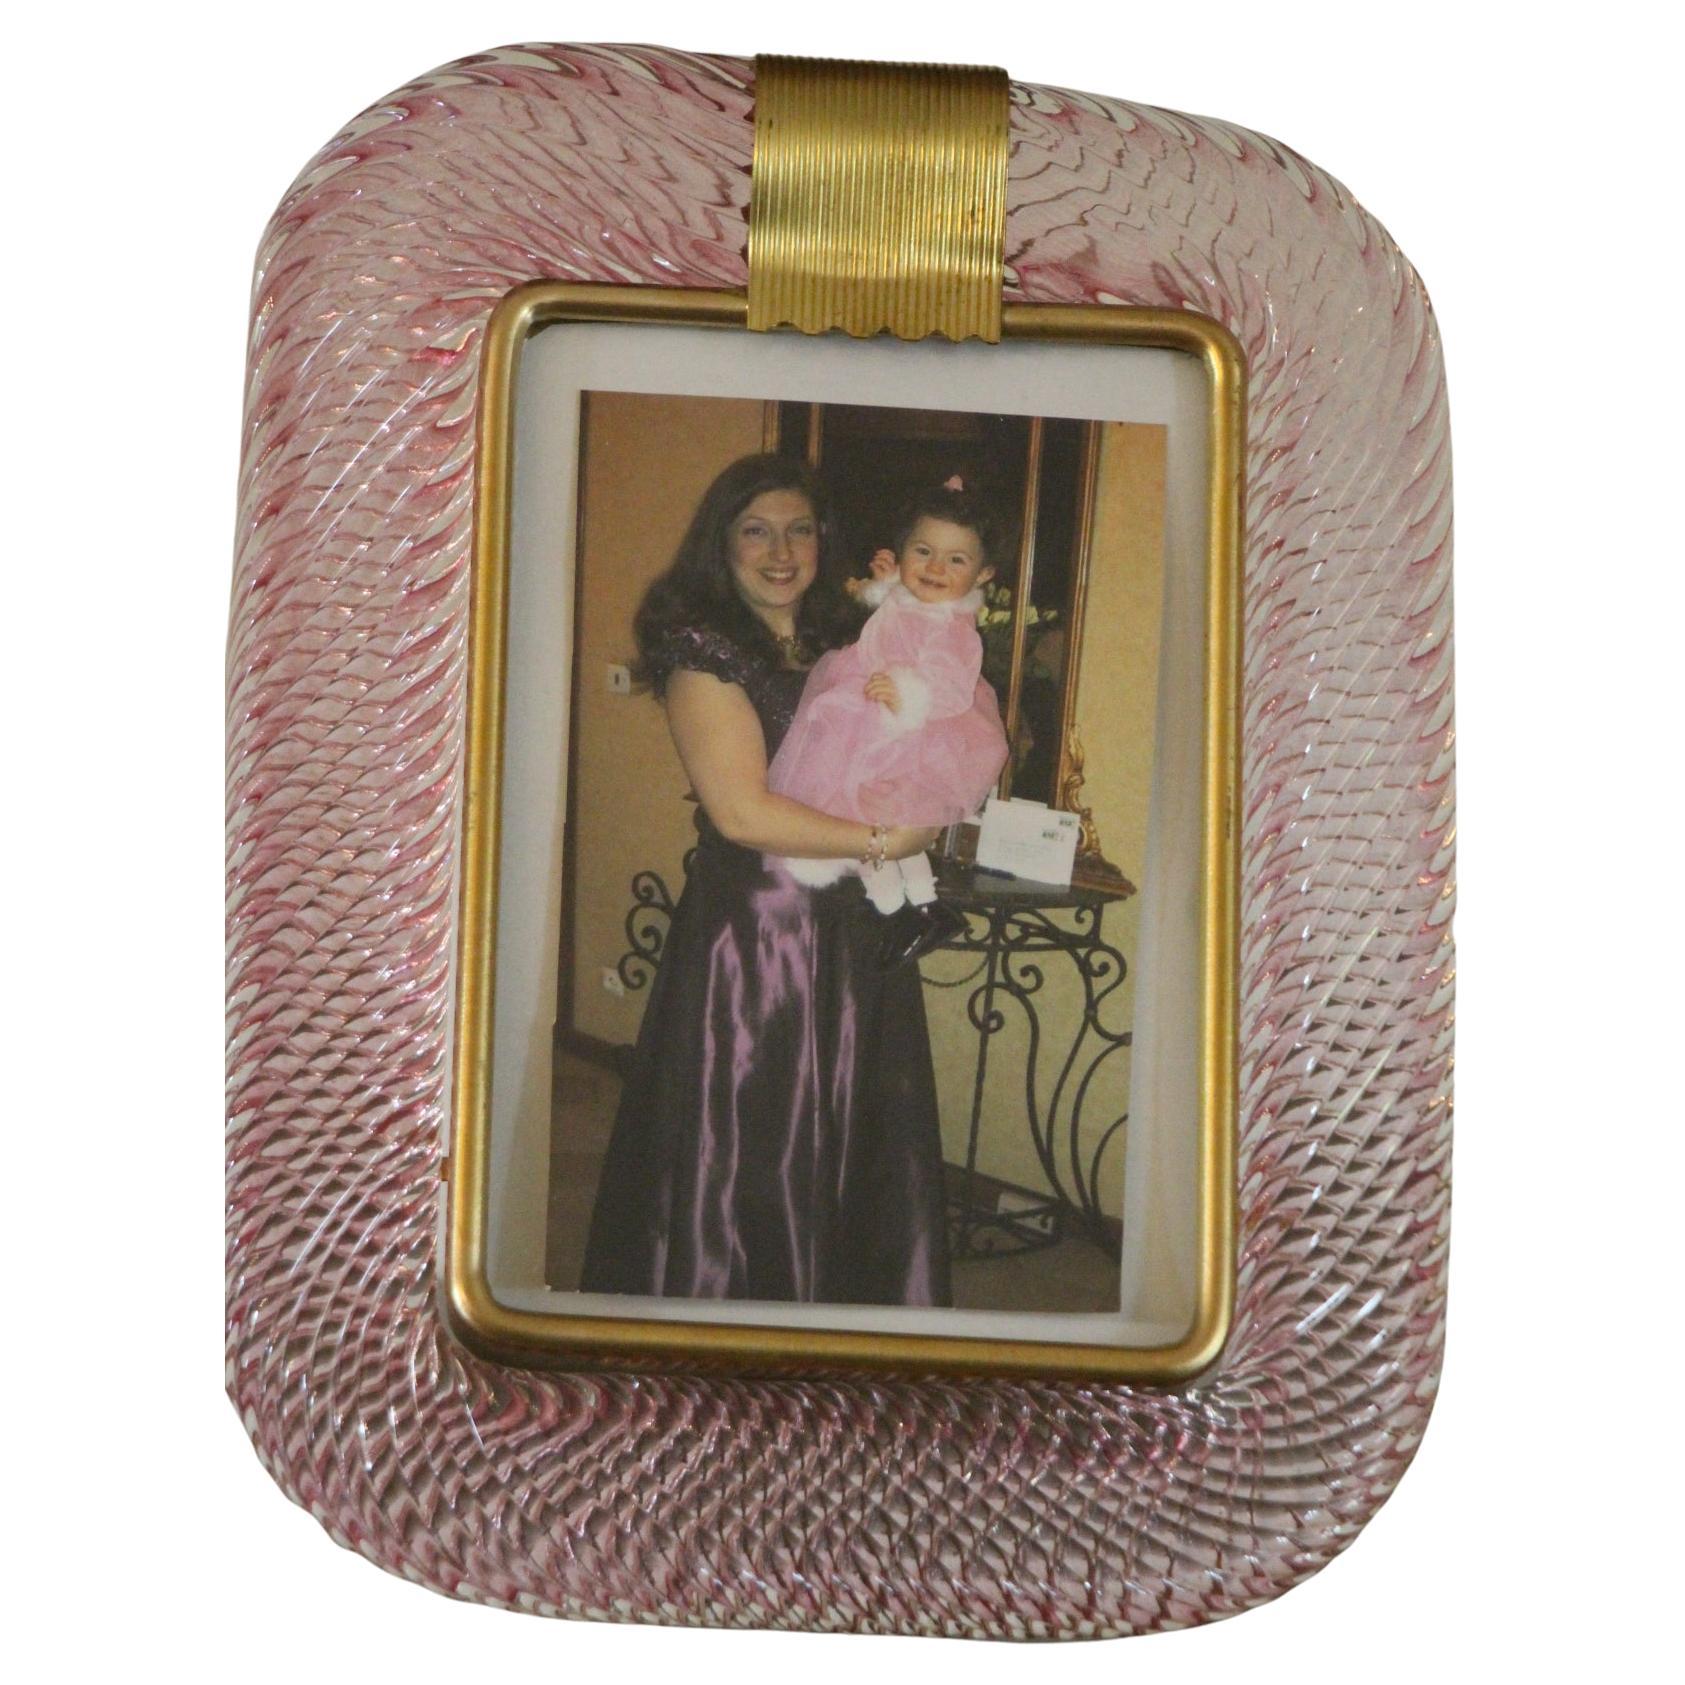 2000's Pink Twisted Murano Glass and Brass Photo Frame by Barovier e Toso For Sale